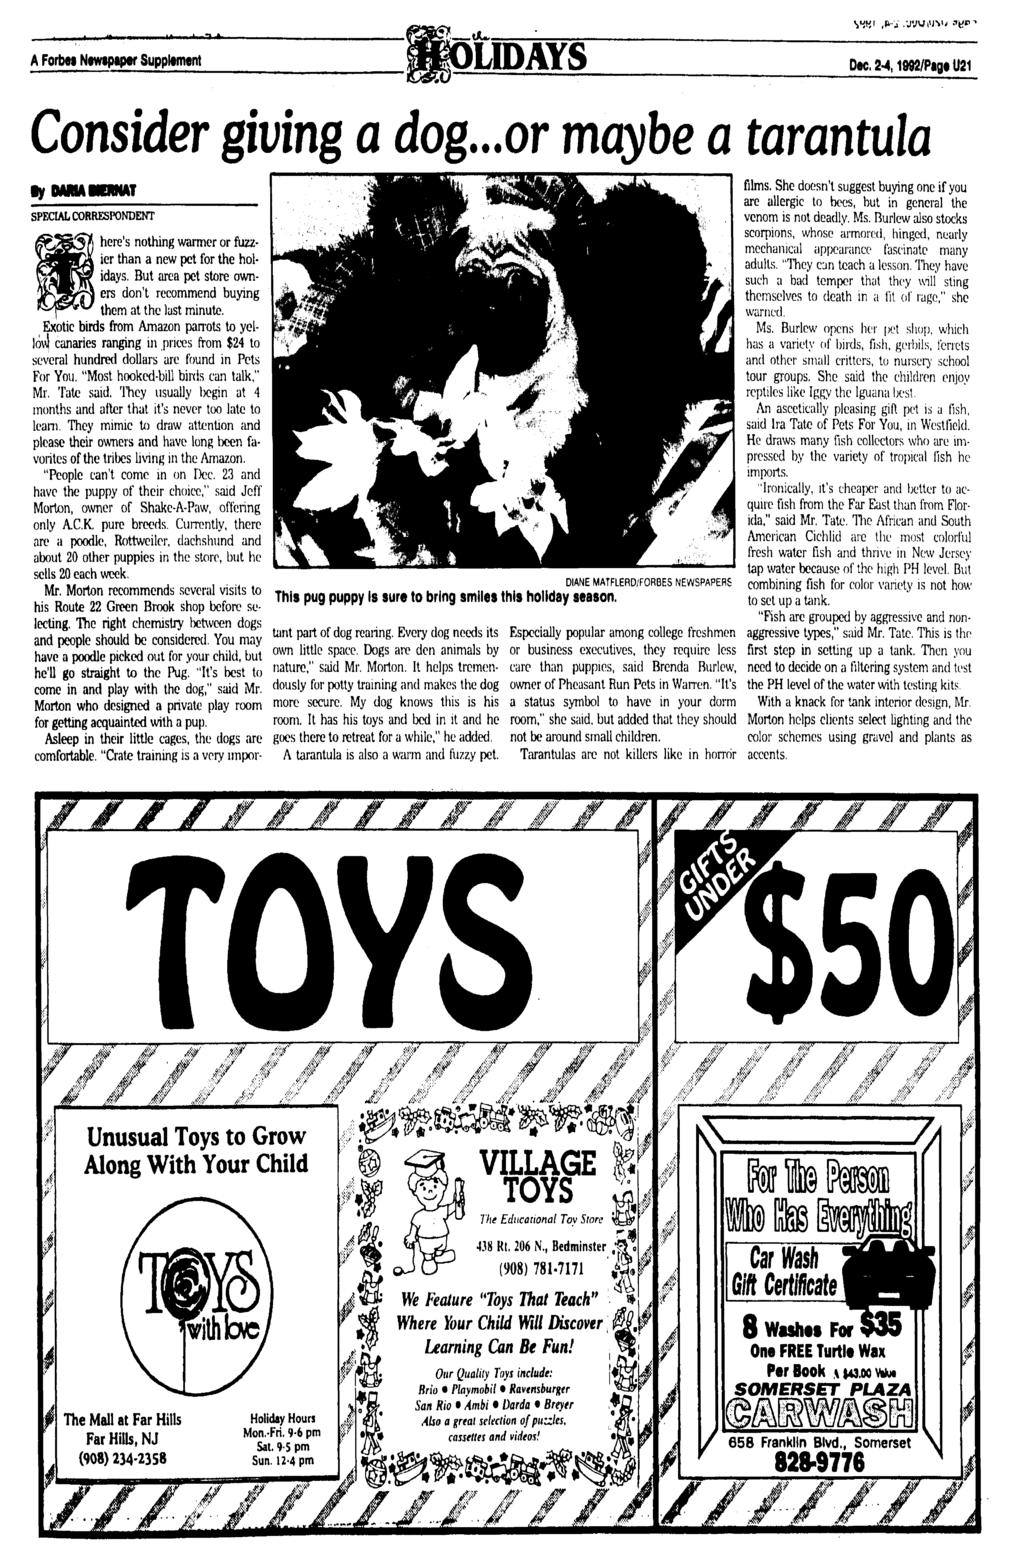 A Forbes Nmpipw Supplement LIDAYS Dec, 2-4,1992/Pagt U21 Consider giving a dog.